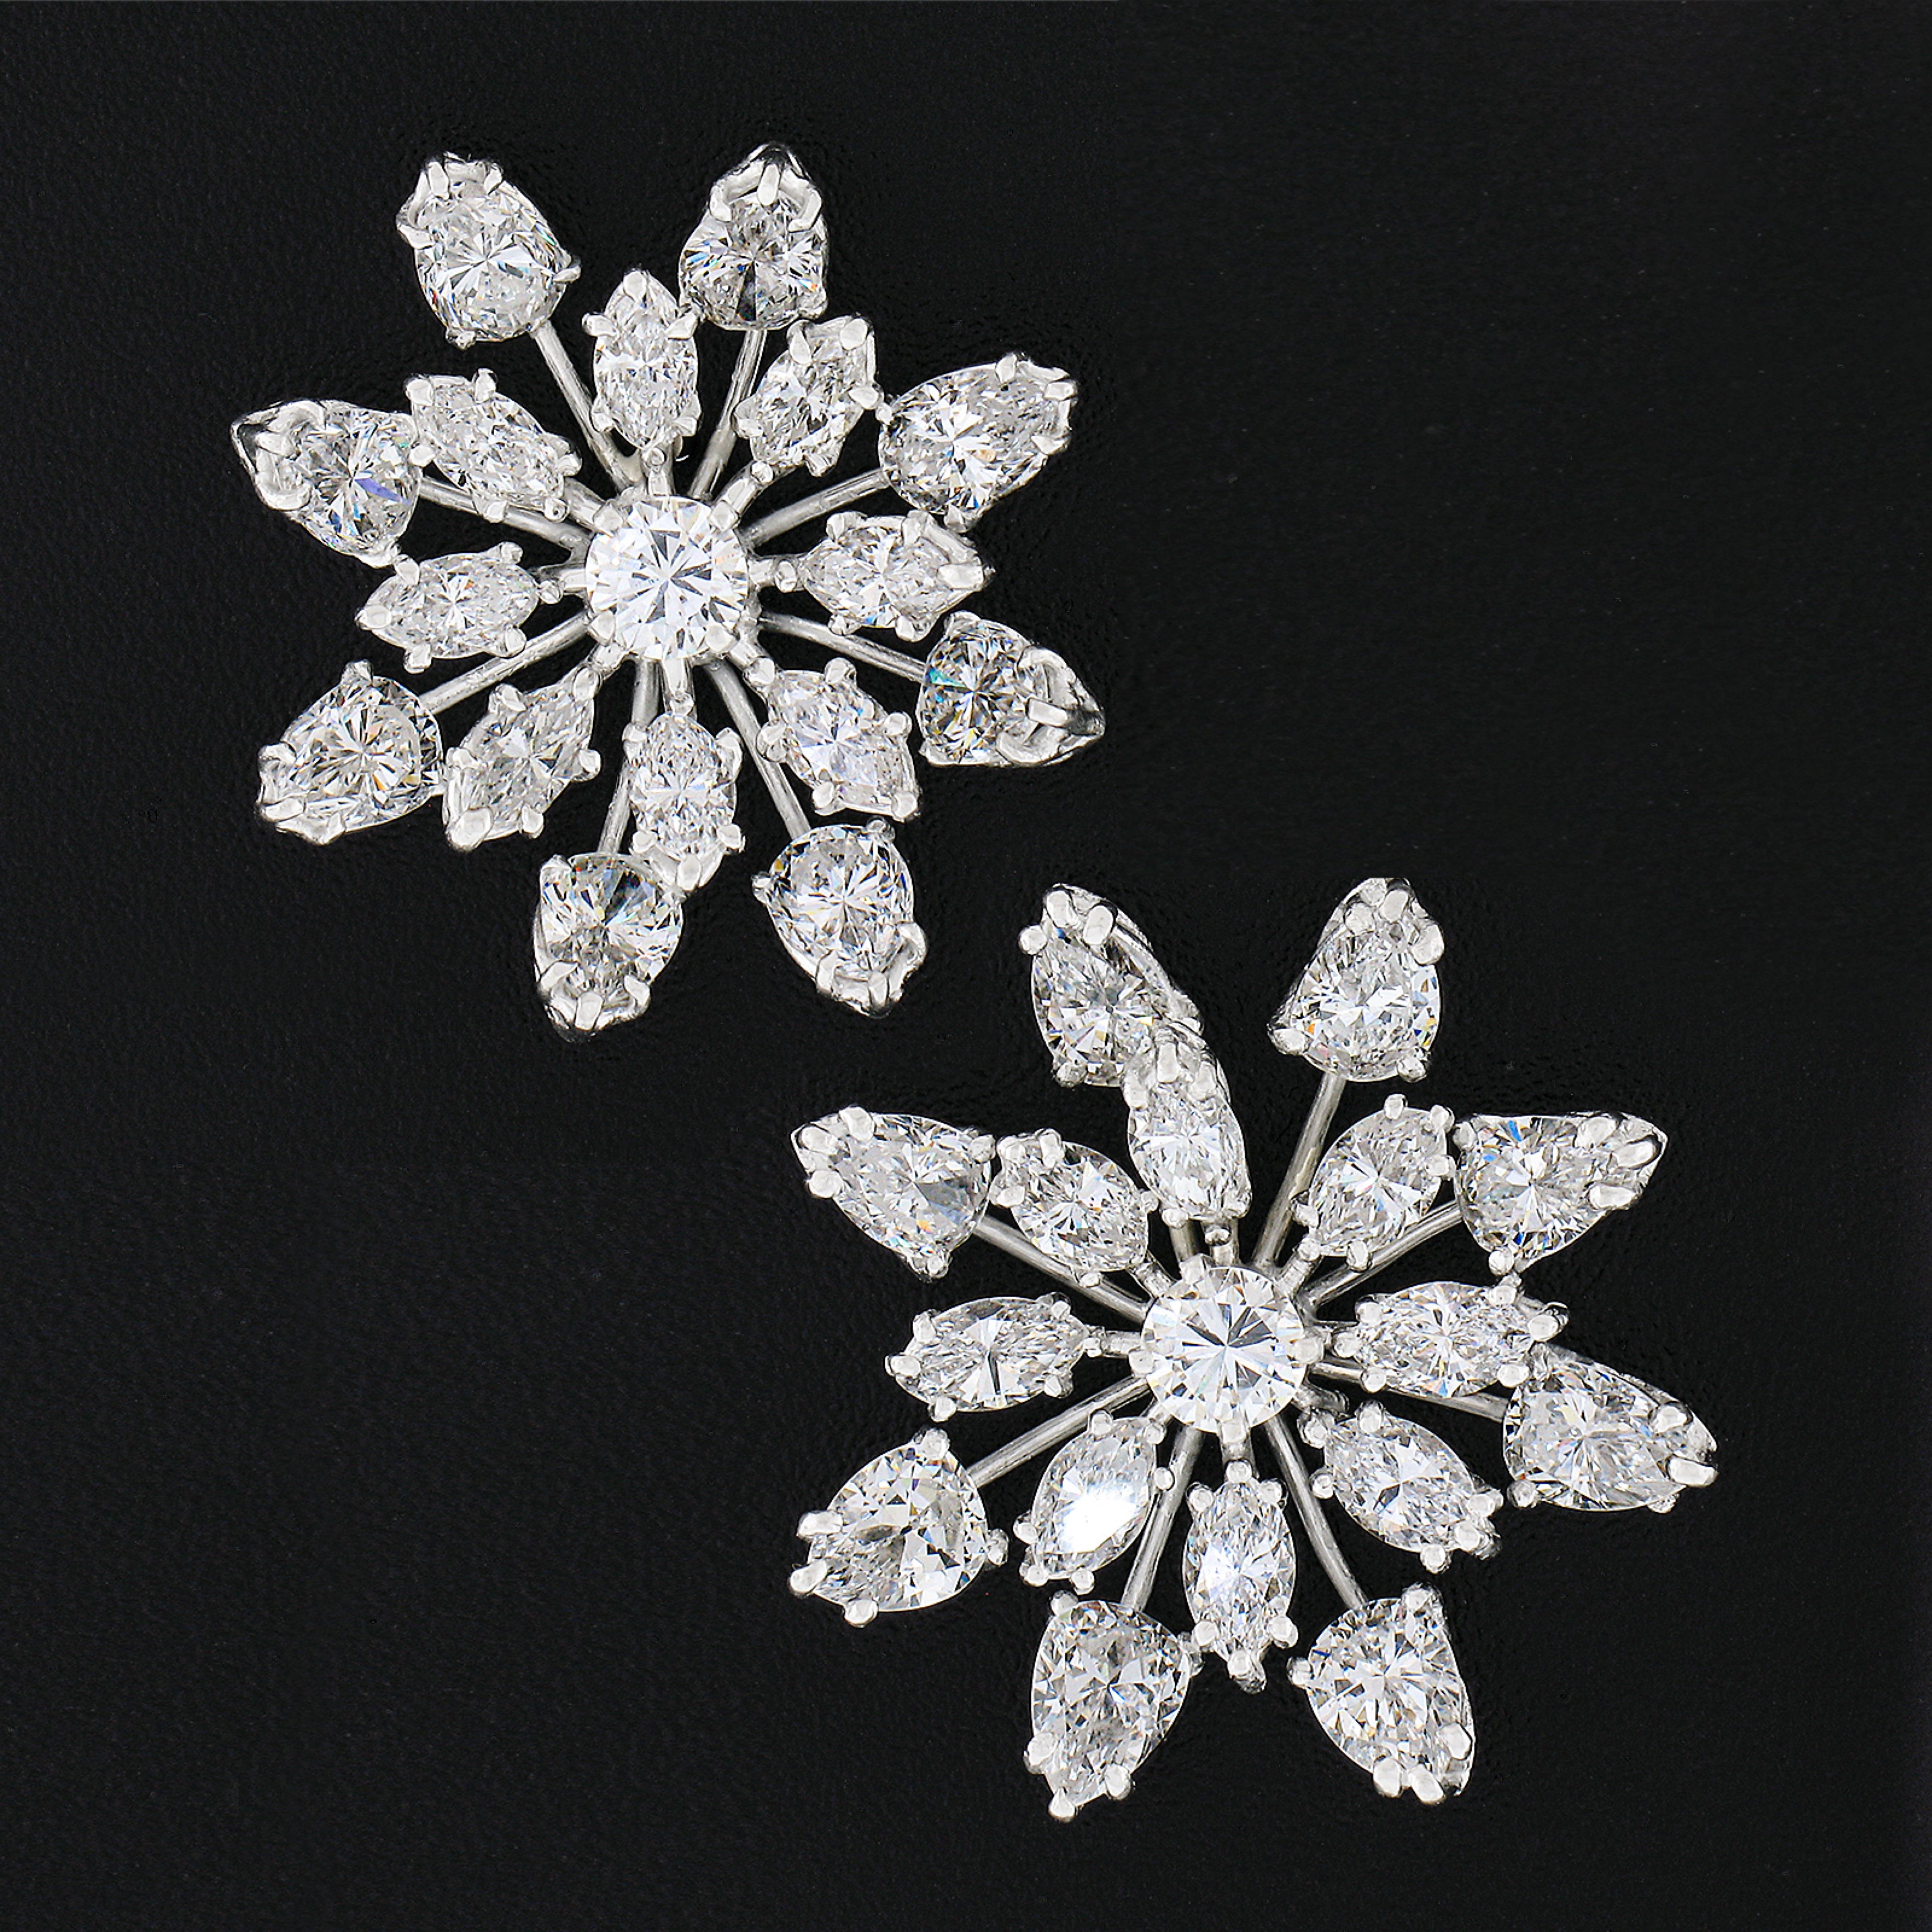 Here we have a jaw dropping pair of vintage earrings crafted from solid platinum featuring a magnificent snowflake spray design drenched with approximately 6.40 carats of super fine quality diamonds throughout. The prong set stones sit in individual